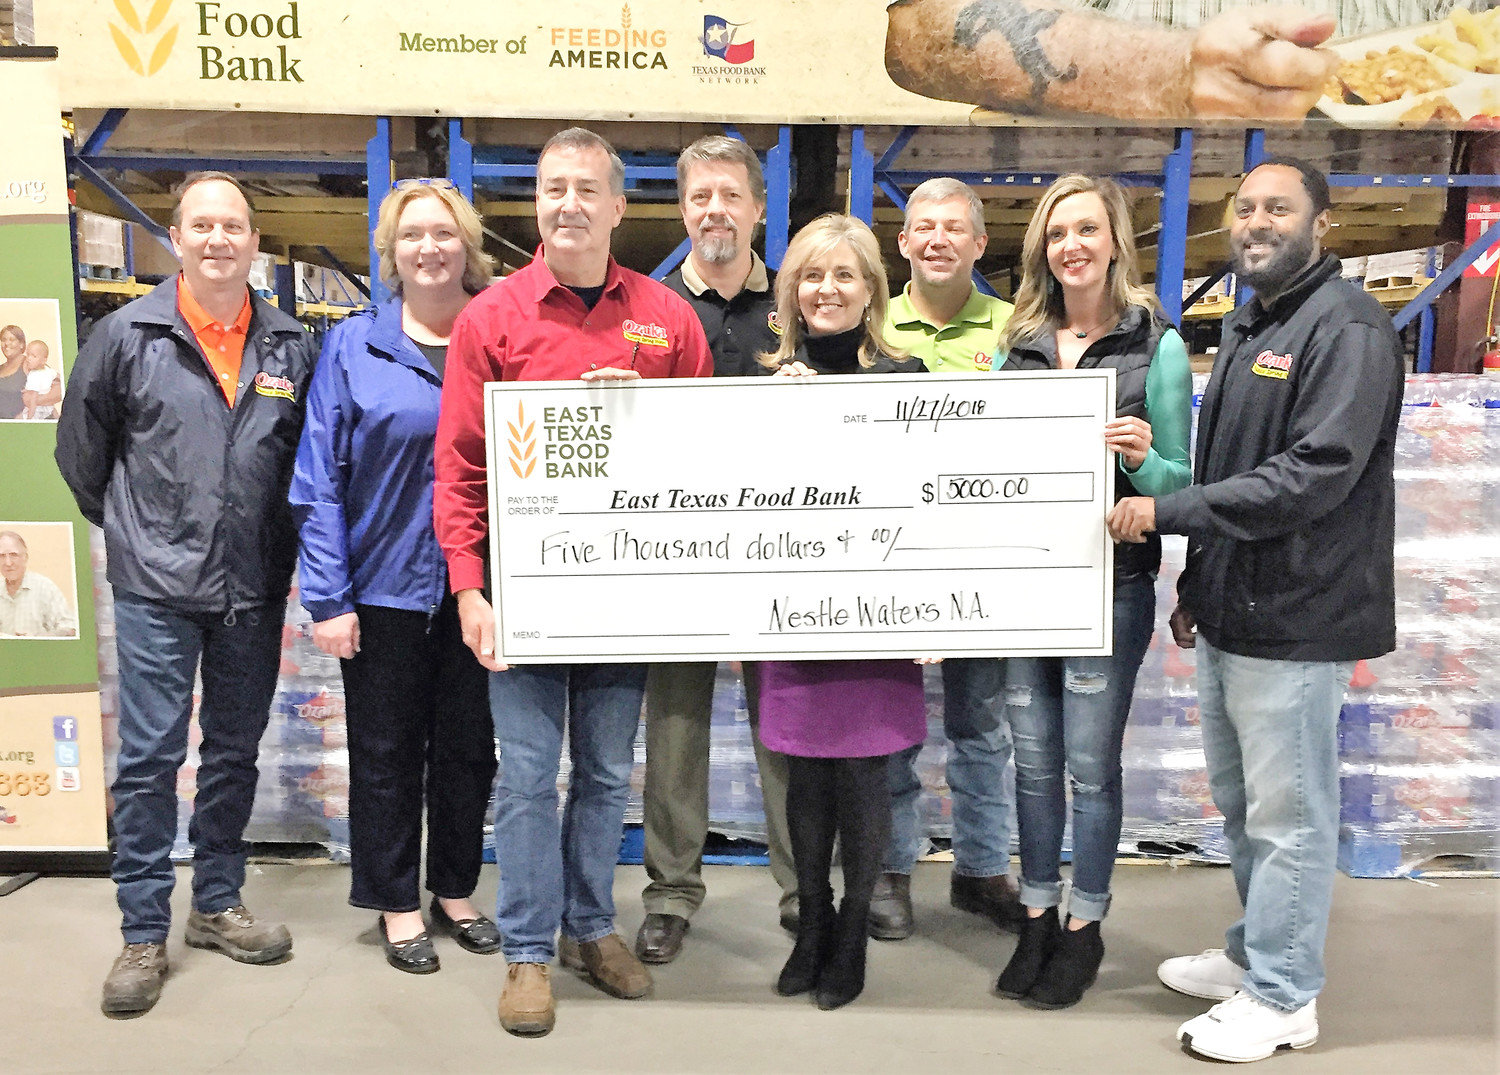 Left to right: Barry Smith, Cheryl Conaway, Jeff Hall (factory manager), Andy Trauger, Donna Spann (director of development and communications for East Texas Food Bank), Jeremy Mathews, Jeri Goswick, and Charles Ridgeway. (Courtesy photo).